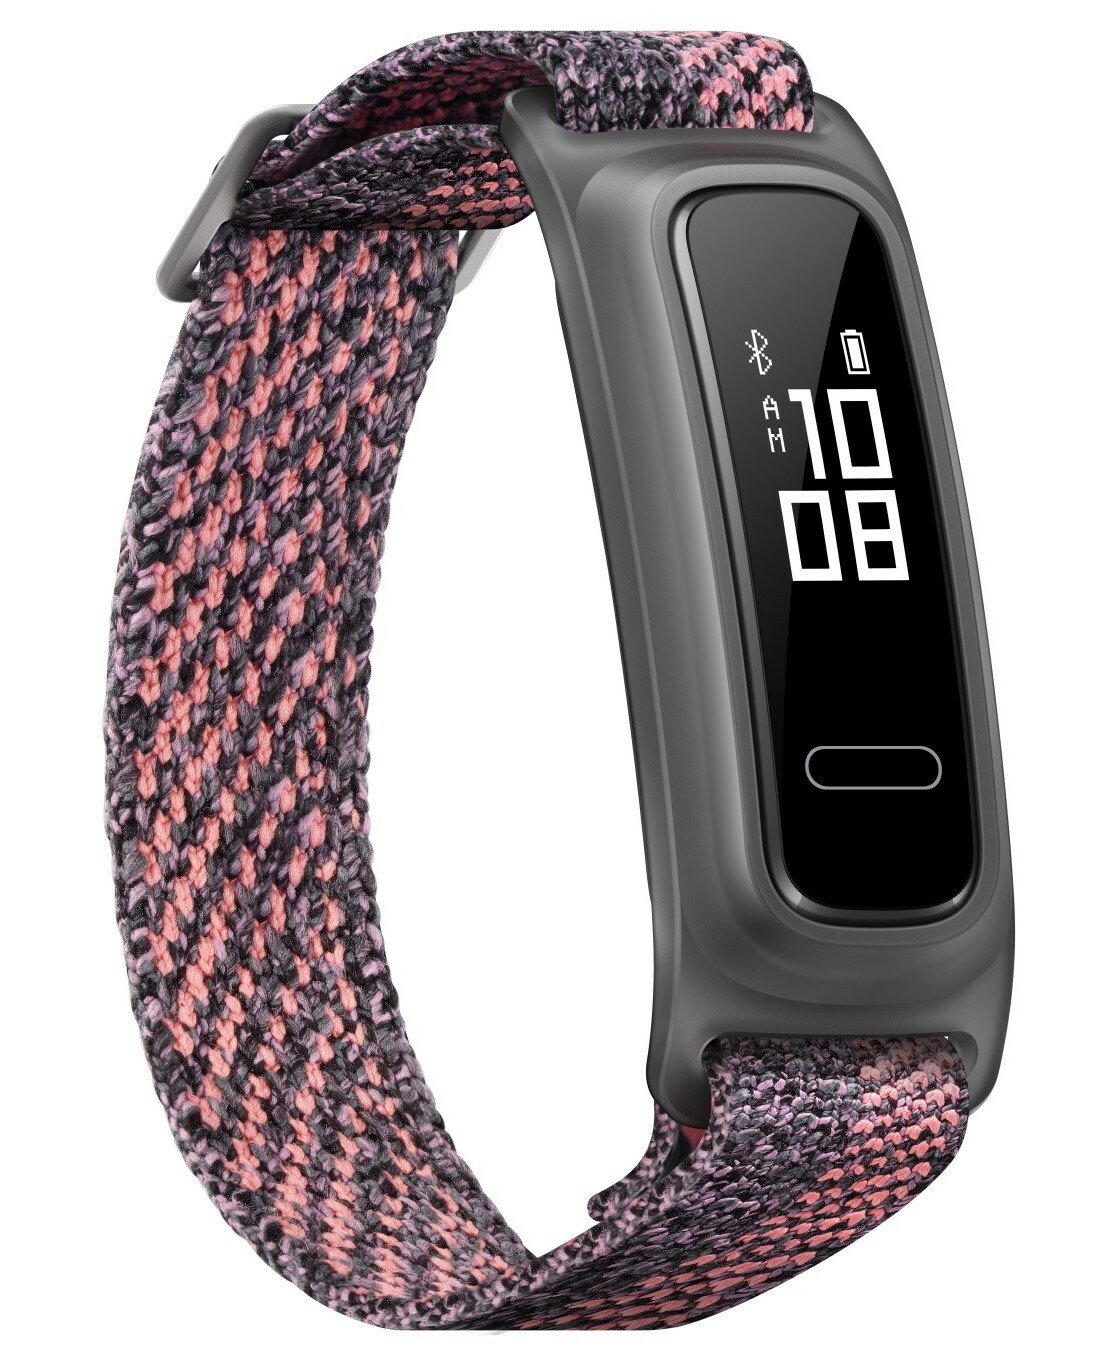 Huawei Band 4e Fitness Tracker - Coral